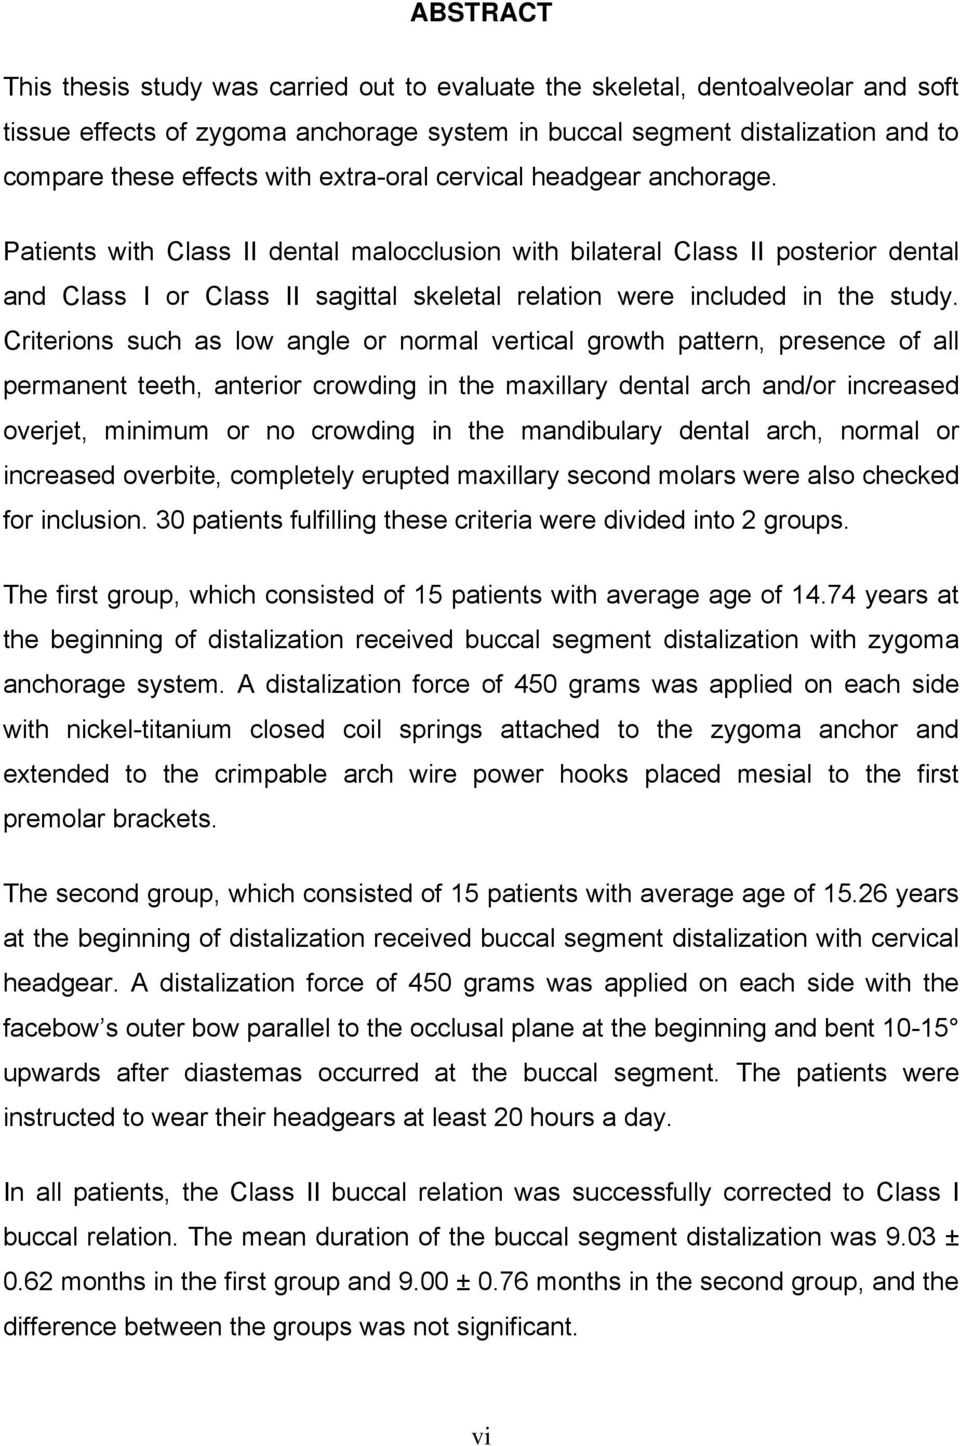 Patients with Class II dental malocclusion with bilateral Class II posterior dental and Class I or Class II sagittal skeletal relation were included in the study.